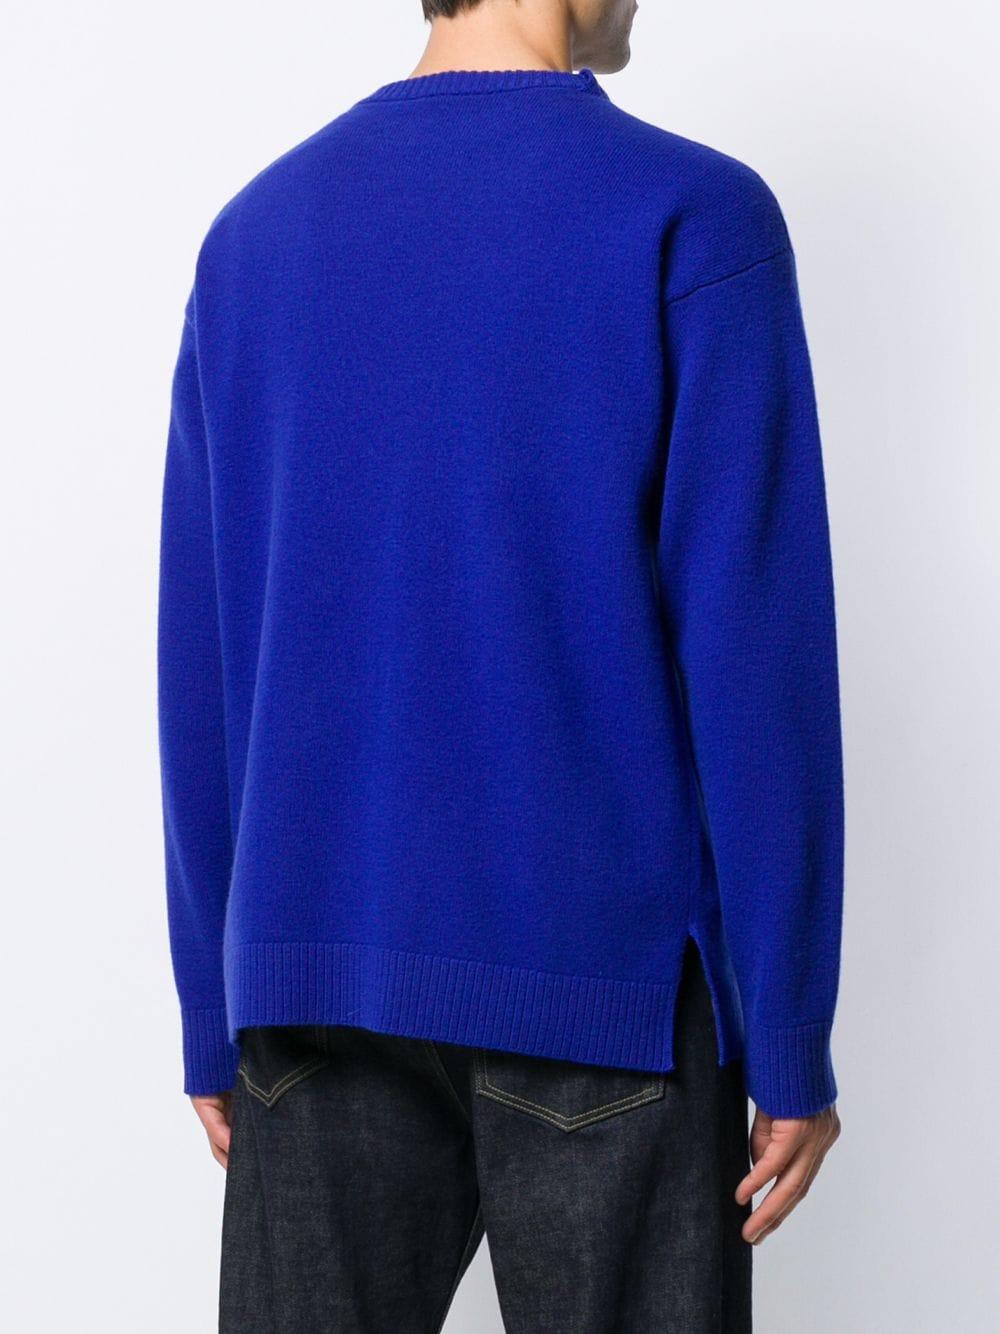 Loewe Leather Anagram Sweater in Blue for Men - Lyst